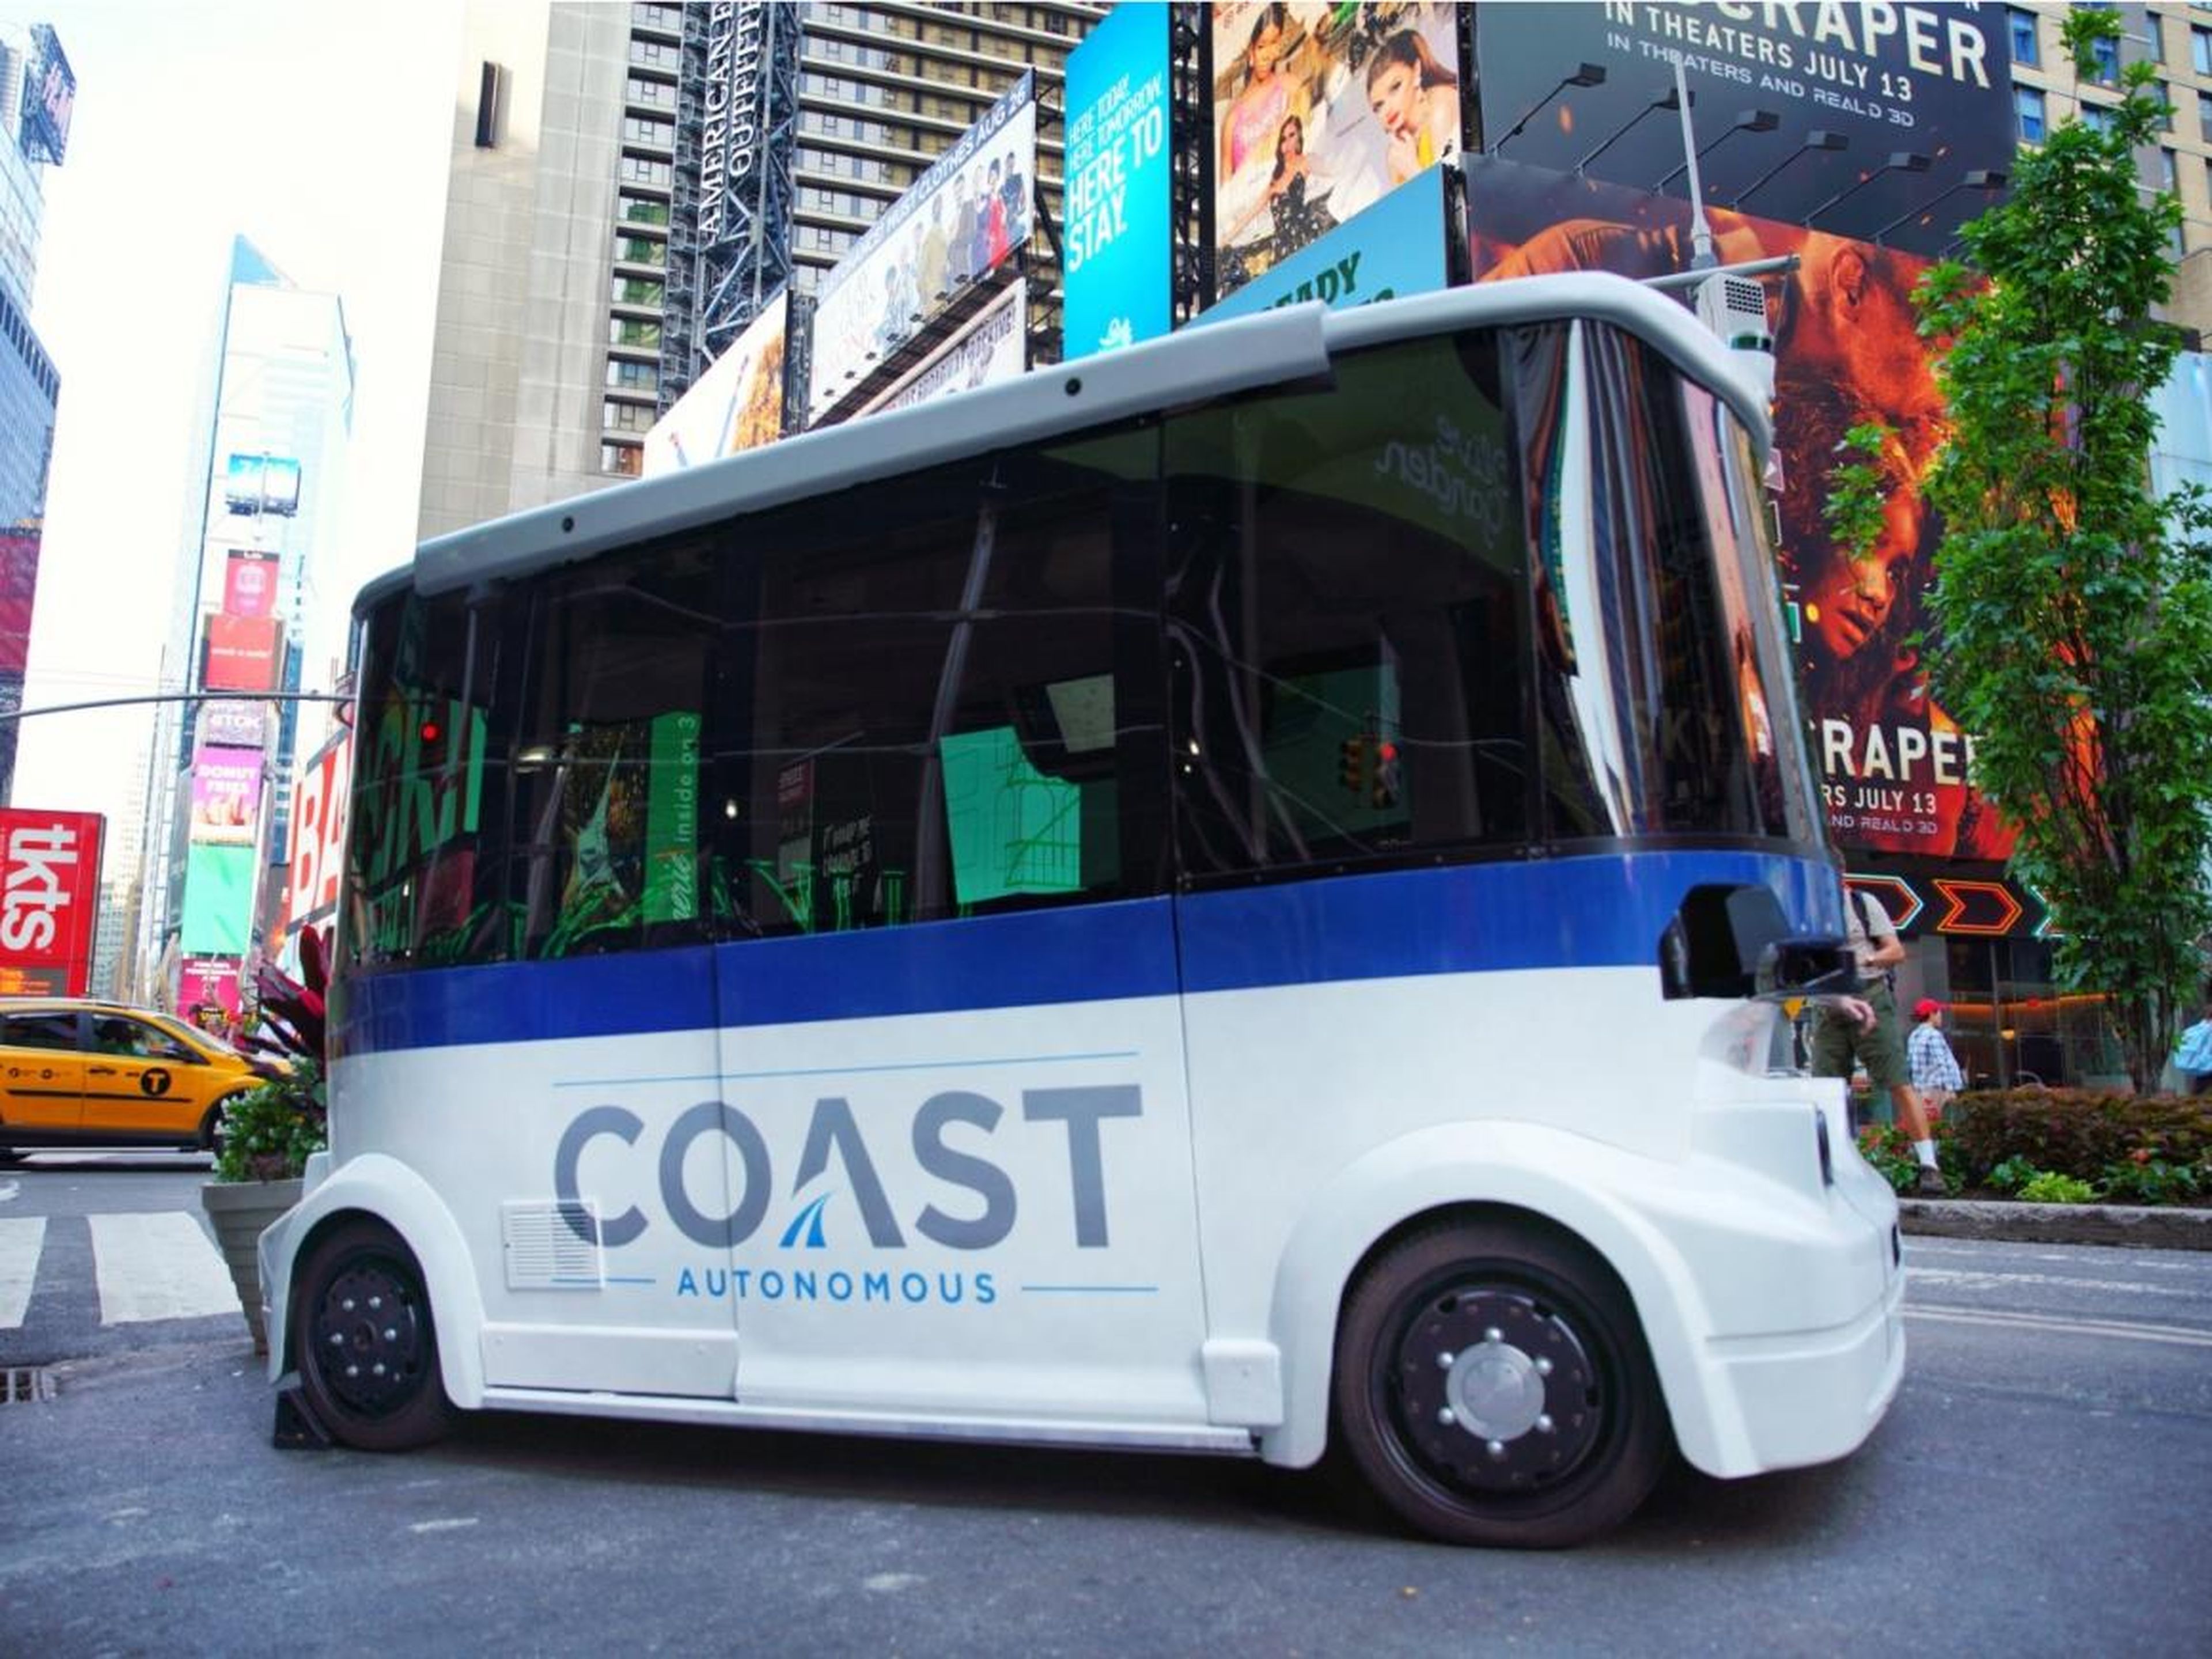 Coast Autonomous makes self-driving software for low-speed vehicles.